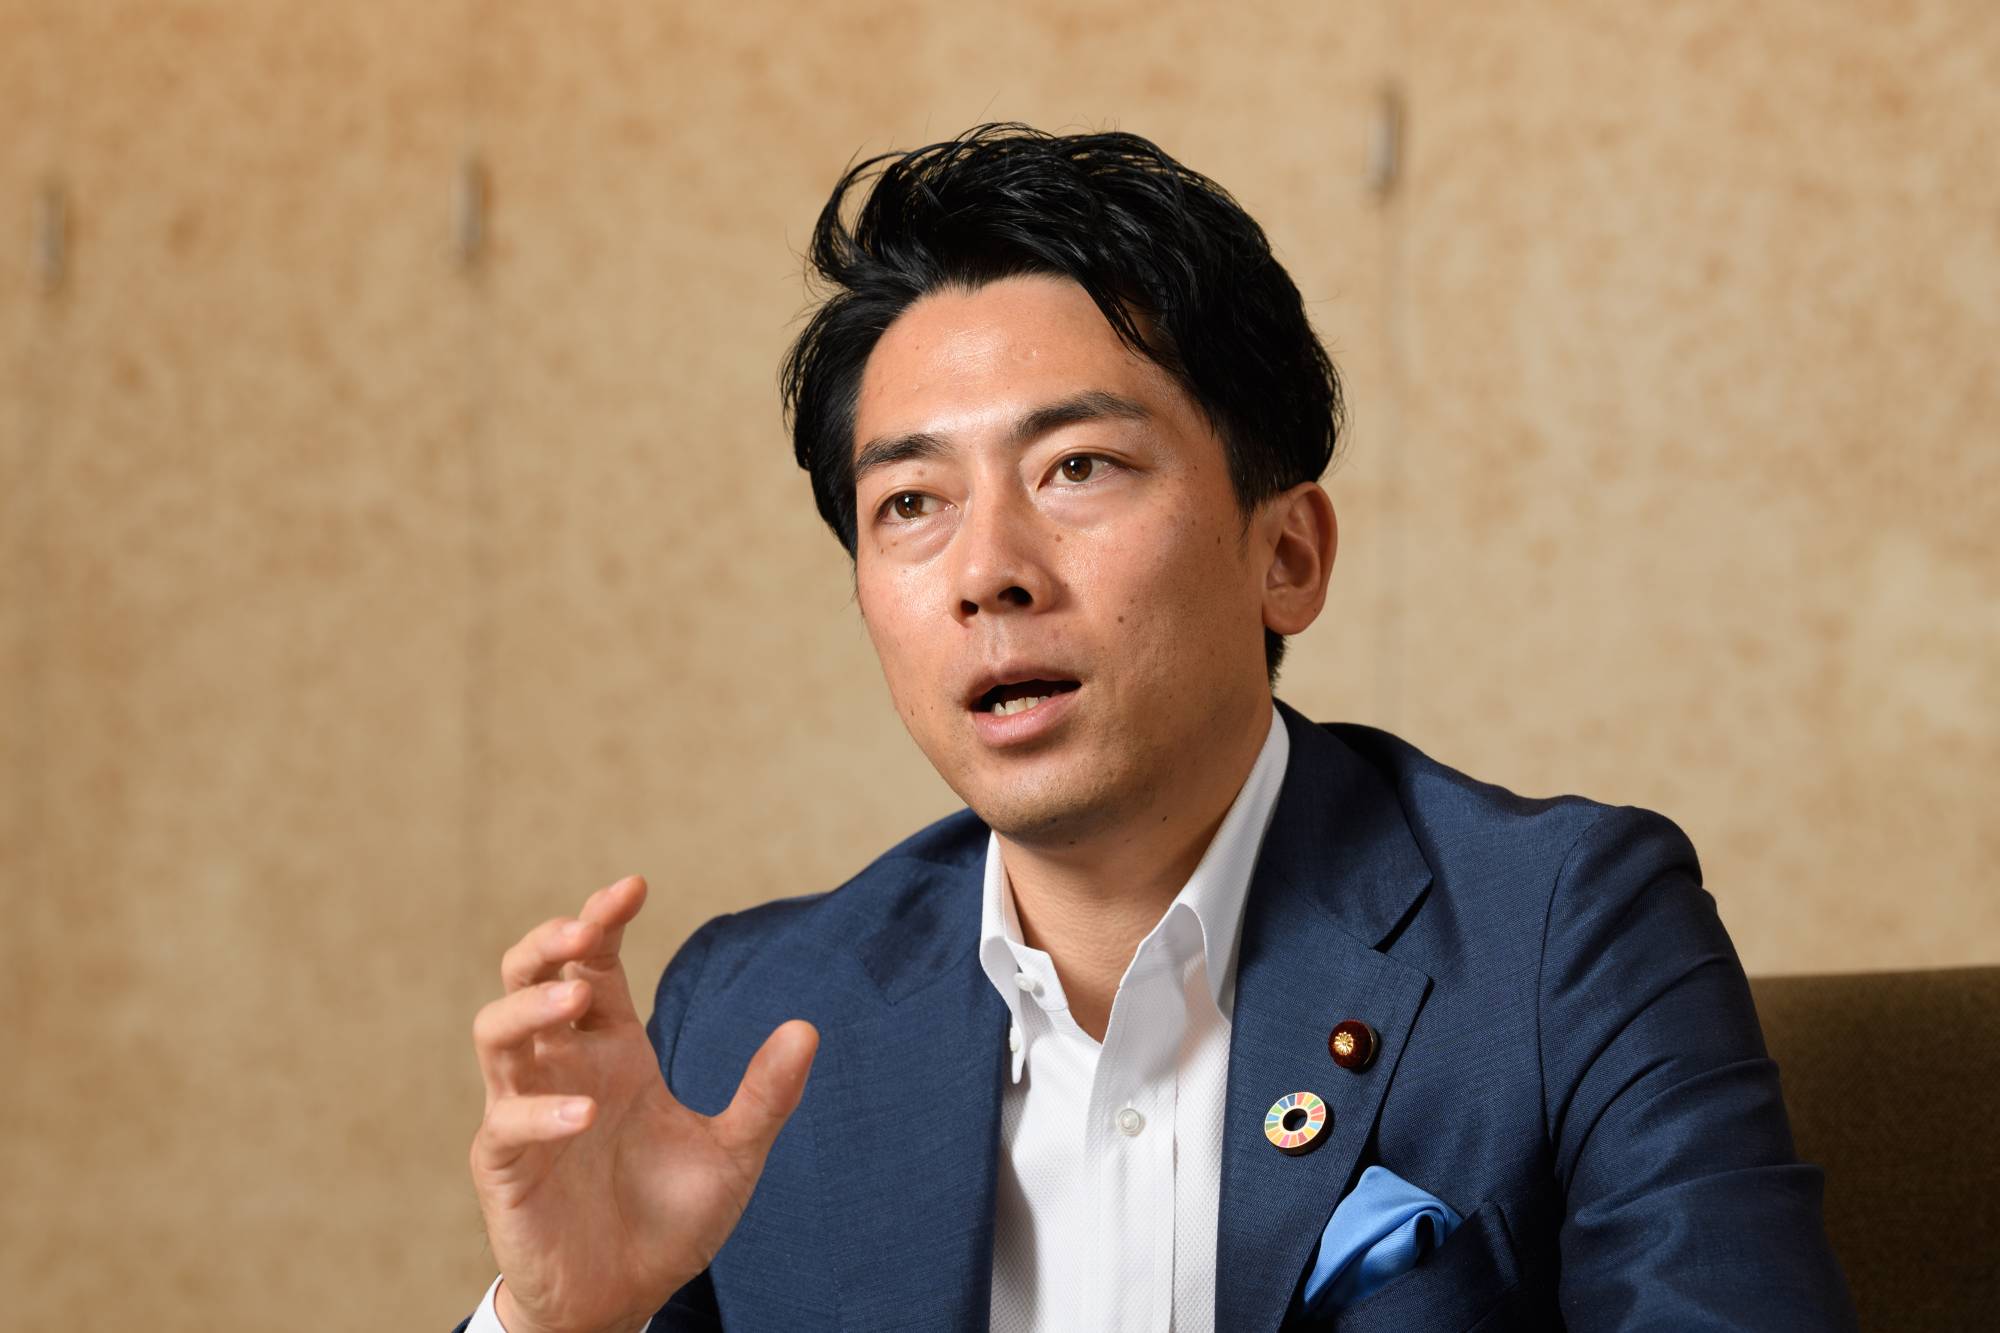 Environmental Minister Shinjiro Koizumi has stated he wants Japan, the world’s fifth-biggest emitter, to aim for deeper cuts as part of its participation in the 2015 Paris climate accord. | BLOOMBERG